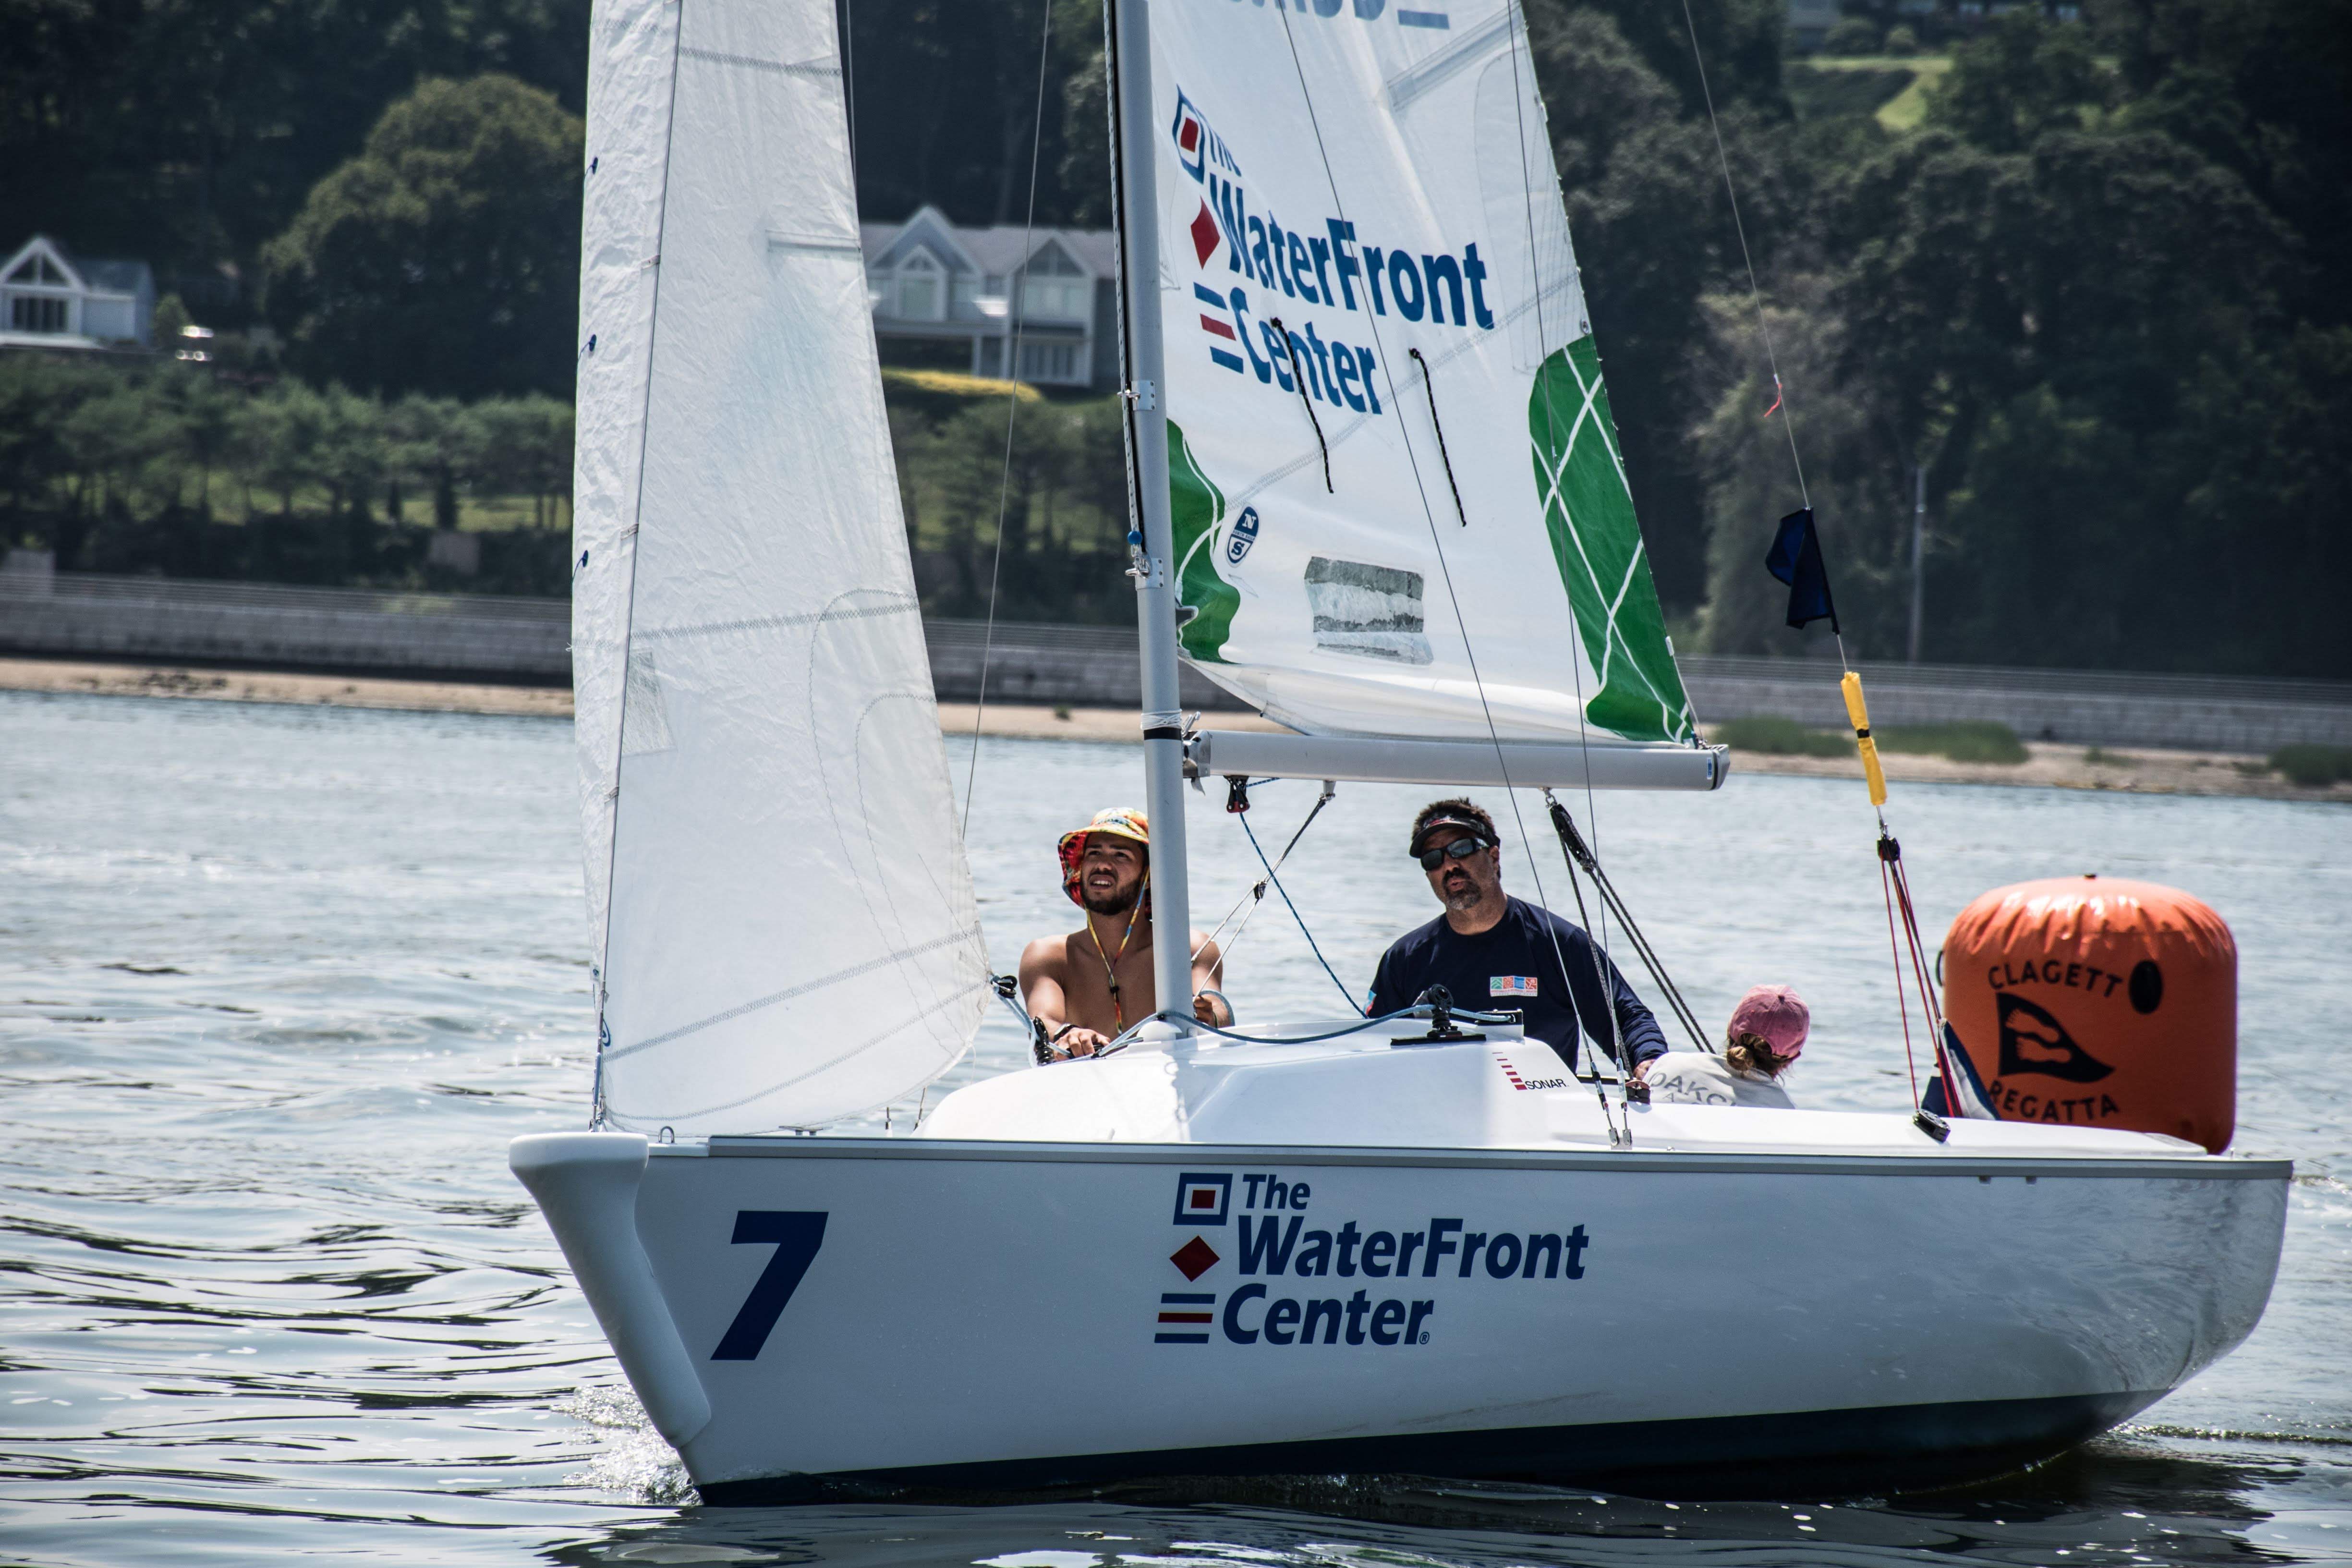 Paralympic medalist signs up for the second annual Clagett/Oakcliff Match Race Regatta